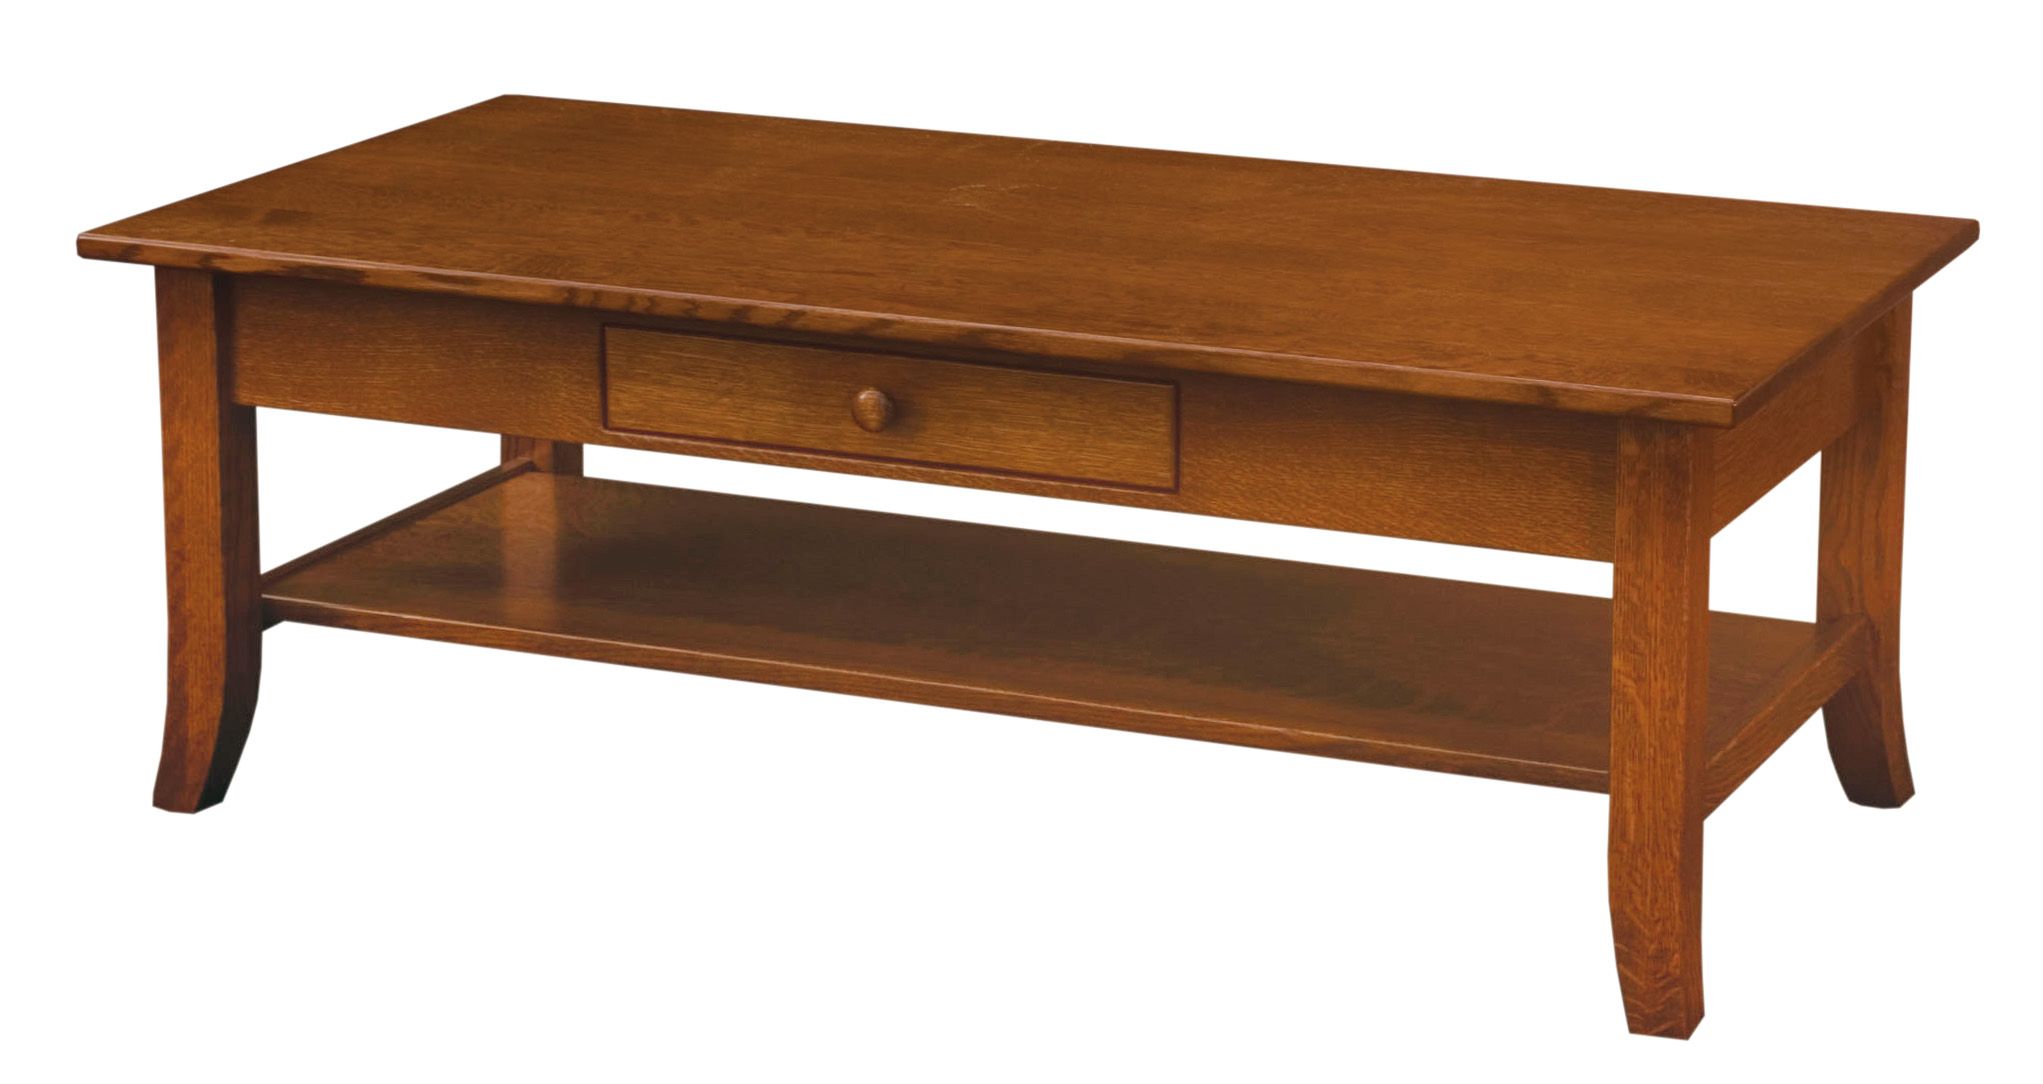 Dresbach Coffee Table | Amish Solid Wood Coffee Tables | Kvadro Furniture Intended For Pemberly Row Replicated Wood Coffee Tables (View 16 of 20)